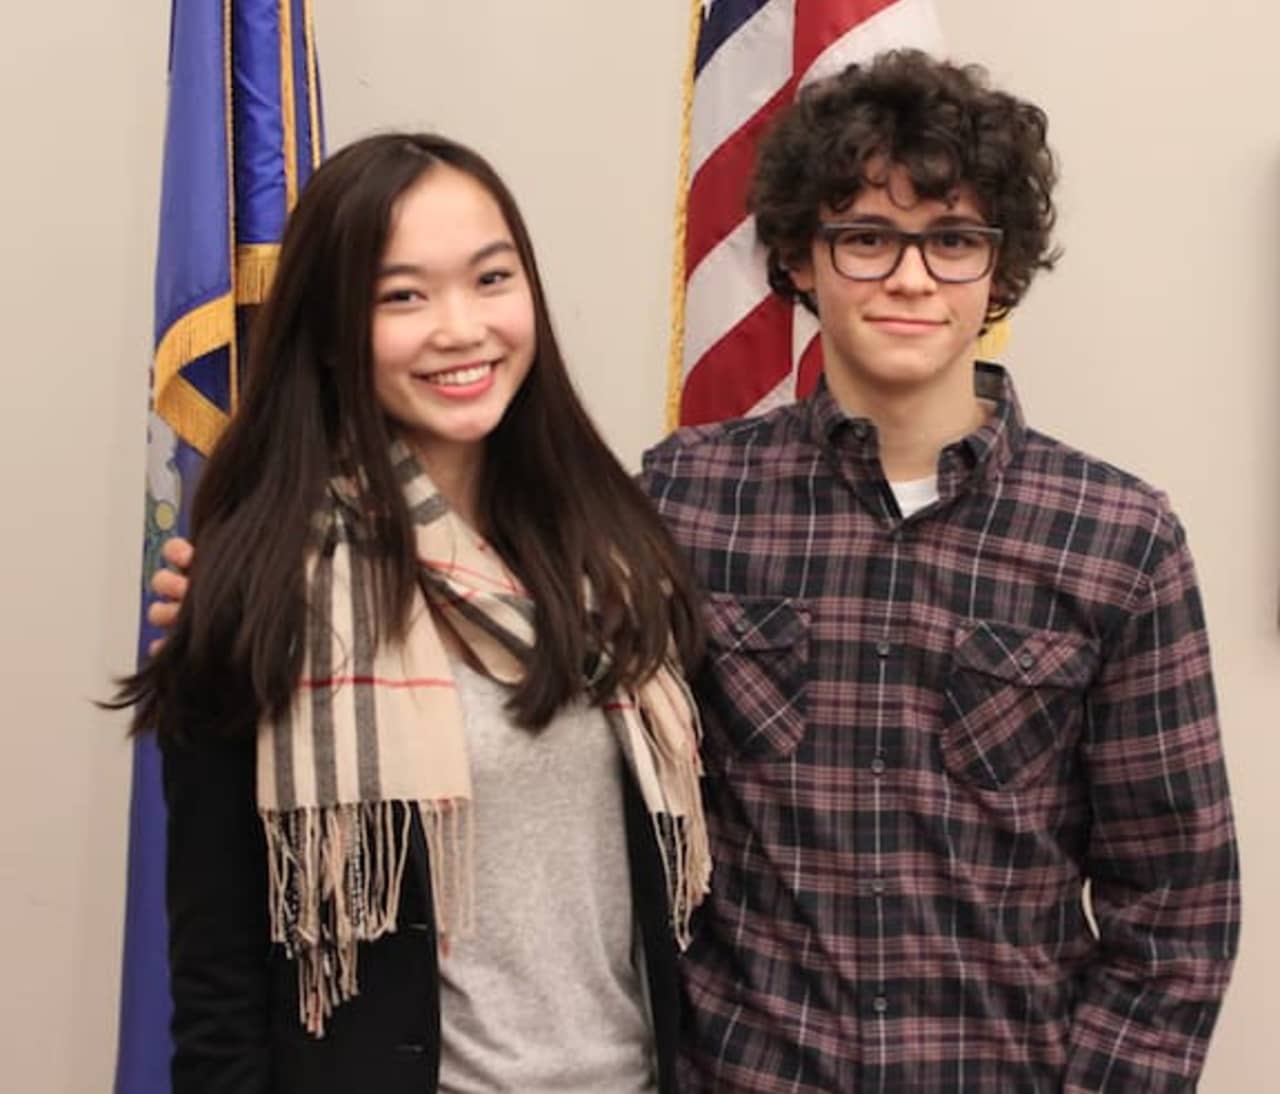 Veronica Ma and Charles Sosnick, seniors at New Canaan High School, were chosen for a prestigious one-week program in Washington, D.C., where they will learn more about how the federal government and its three branches work. It's held in March.